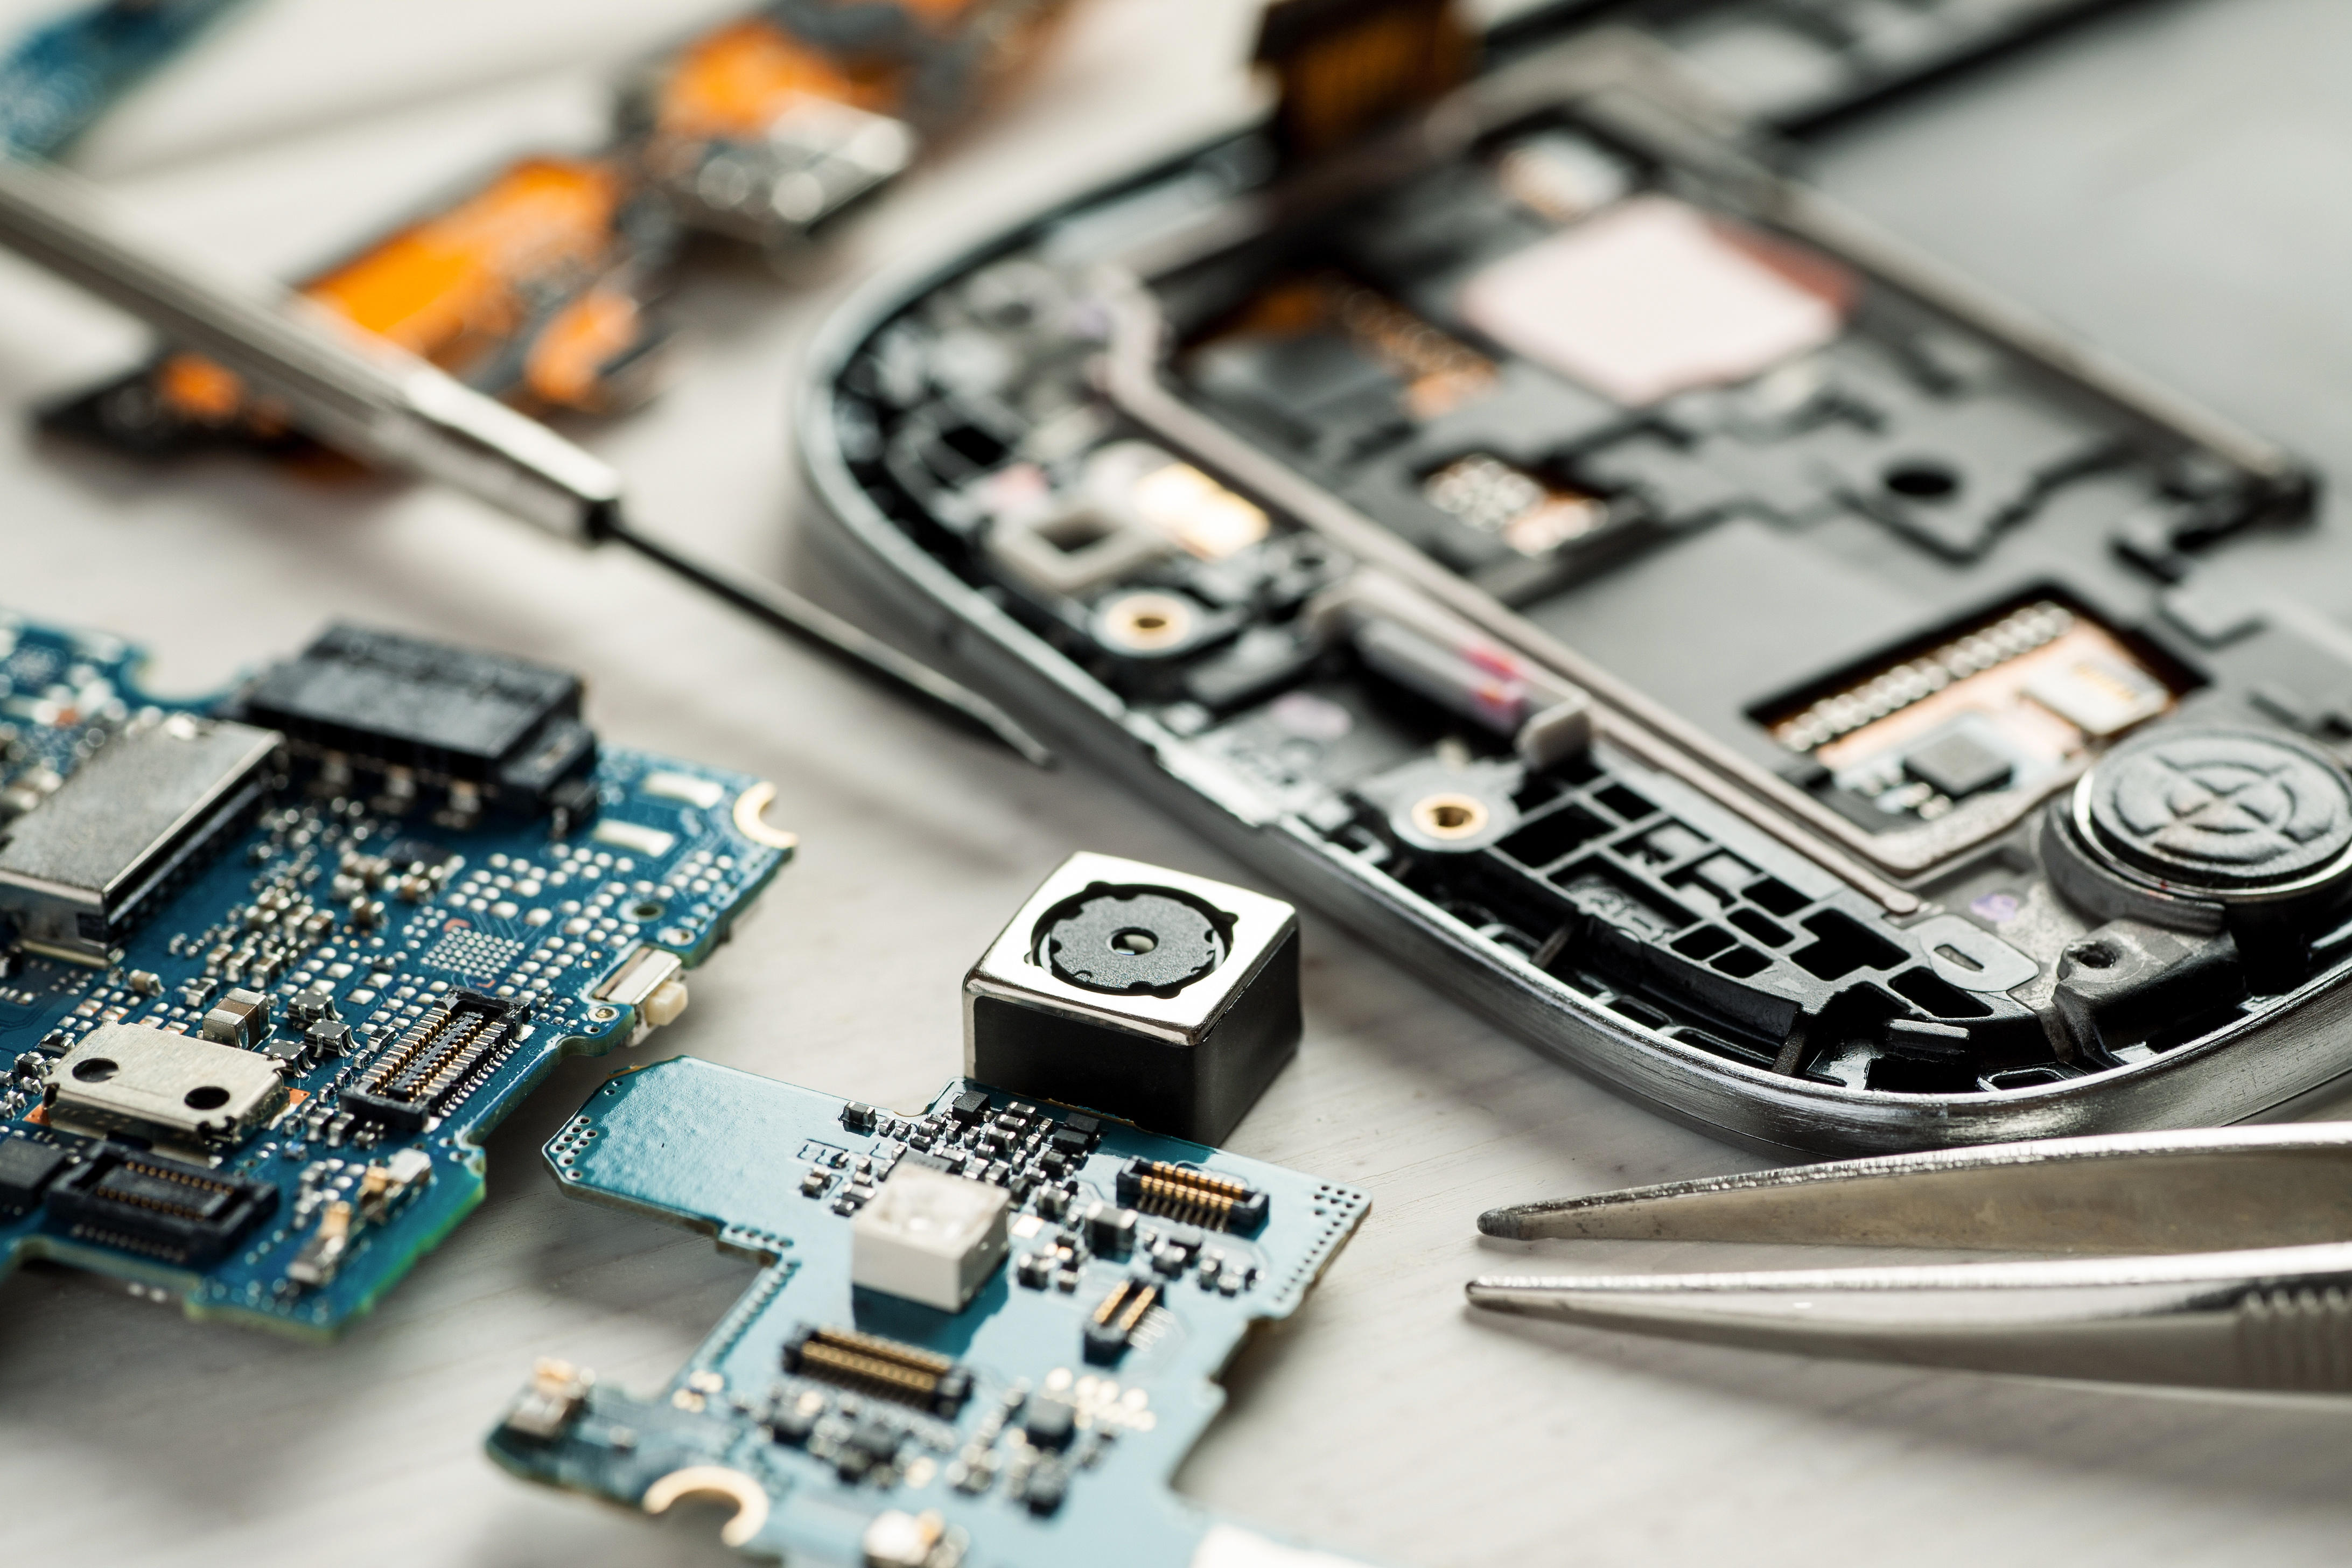 Parts of digital gadgets with tools. Repair and service concept.